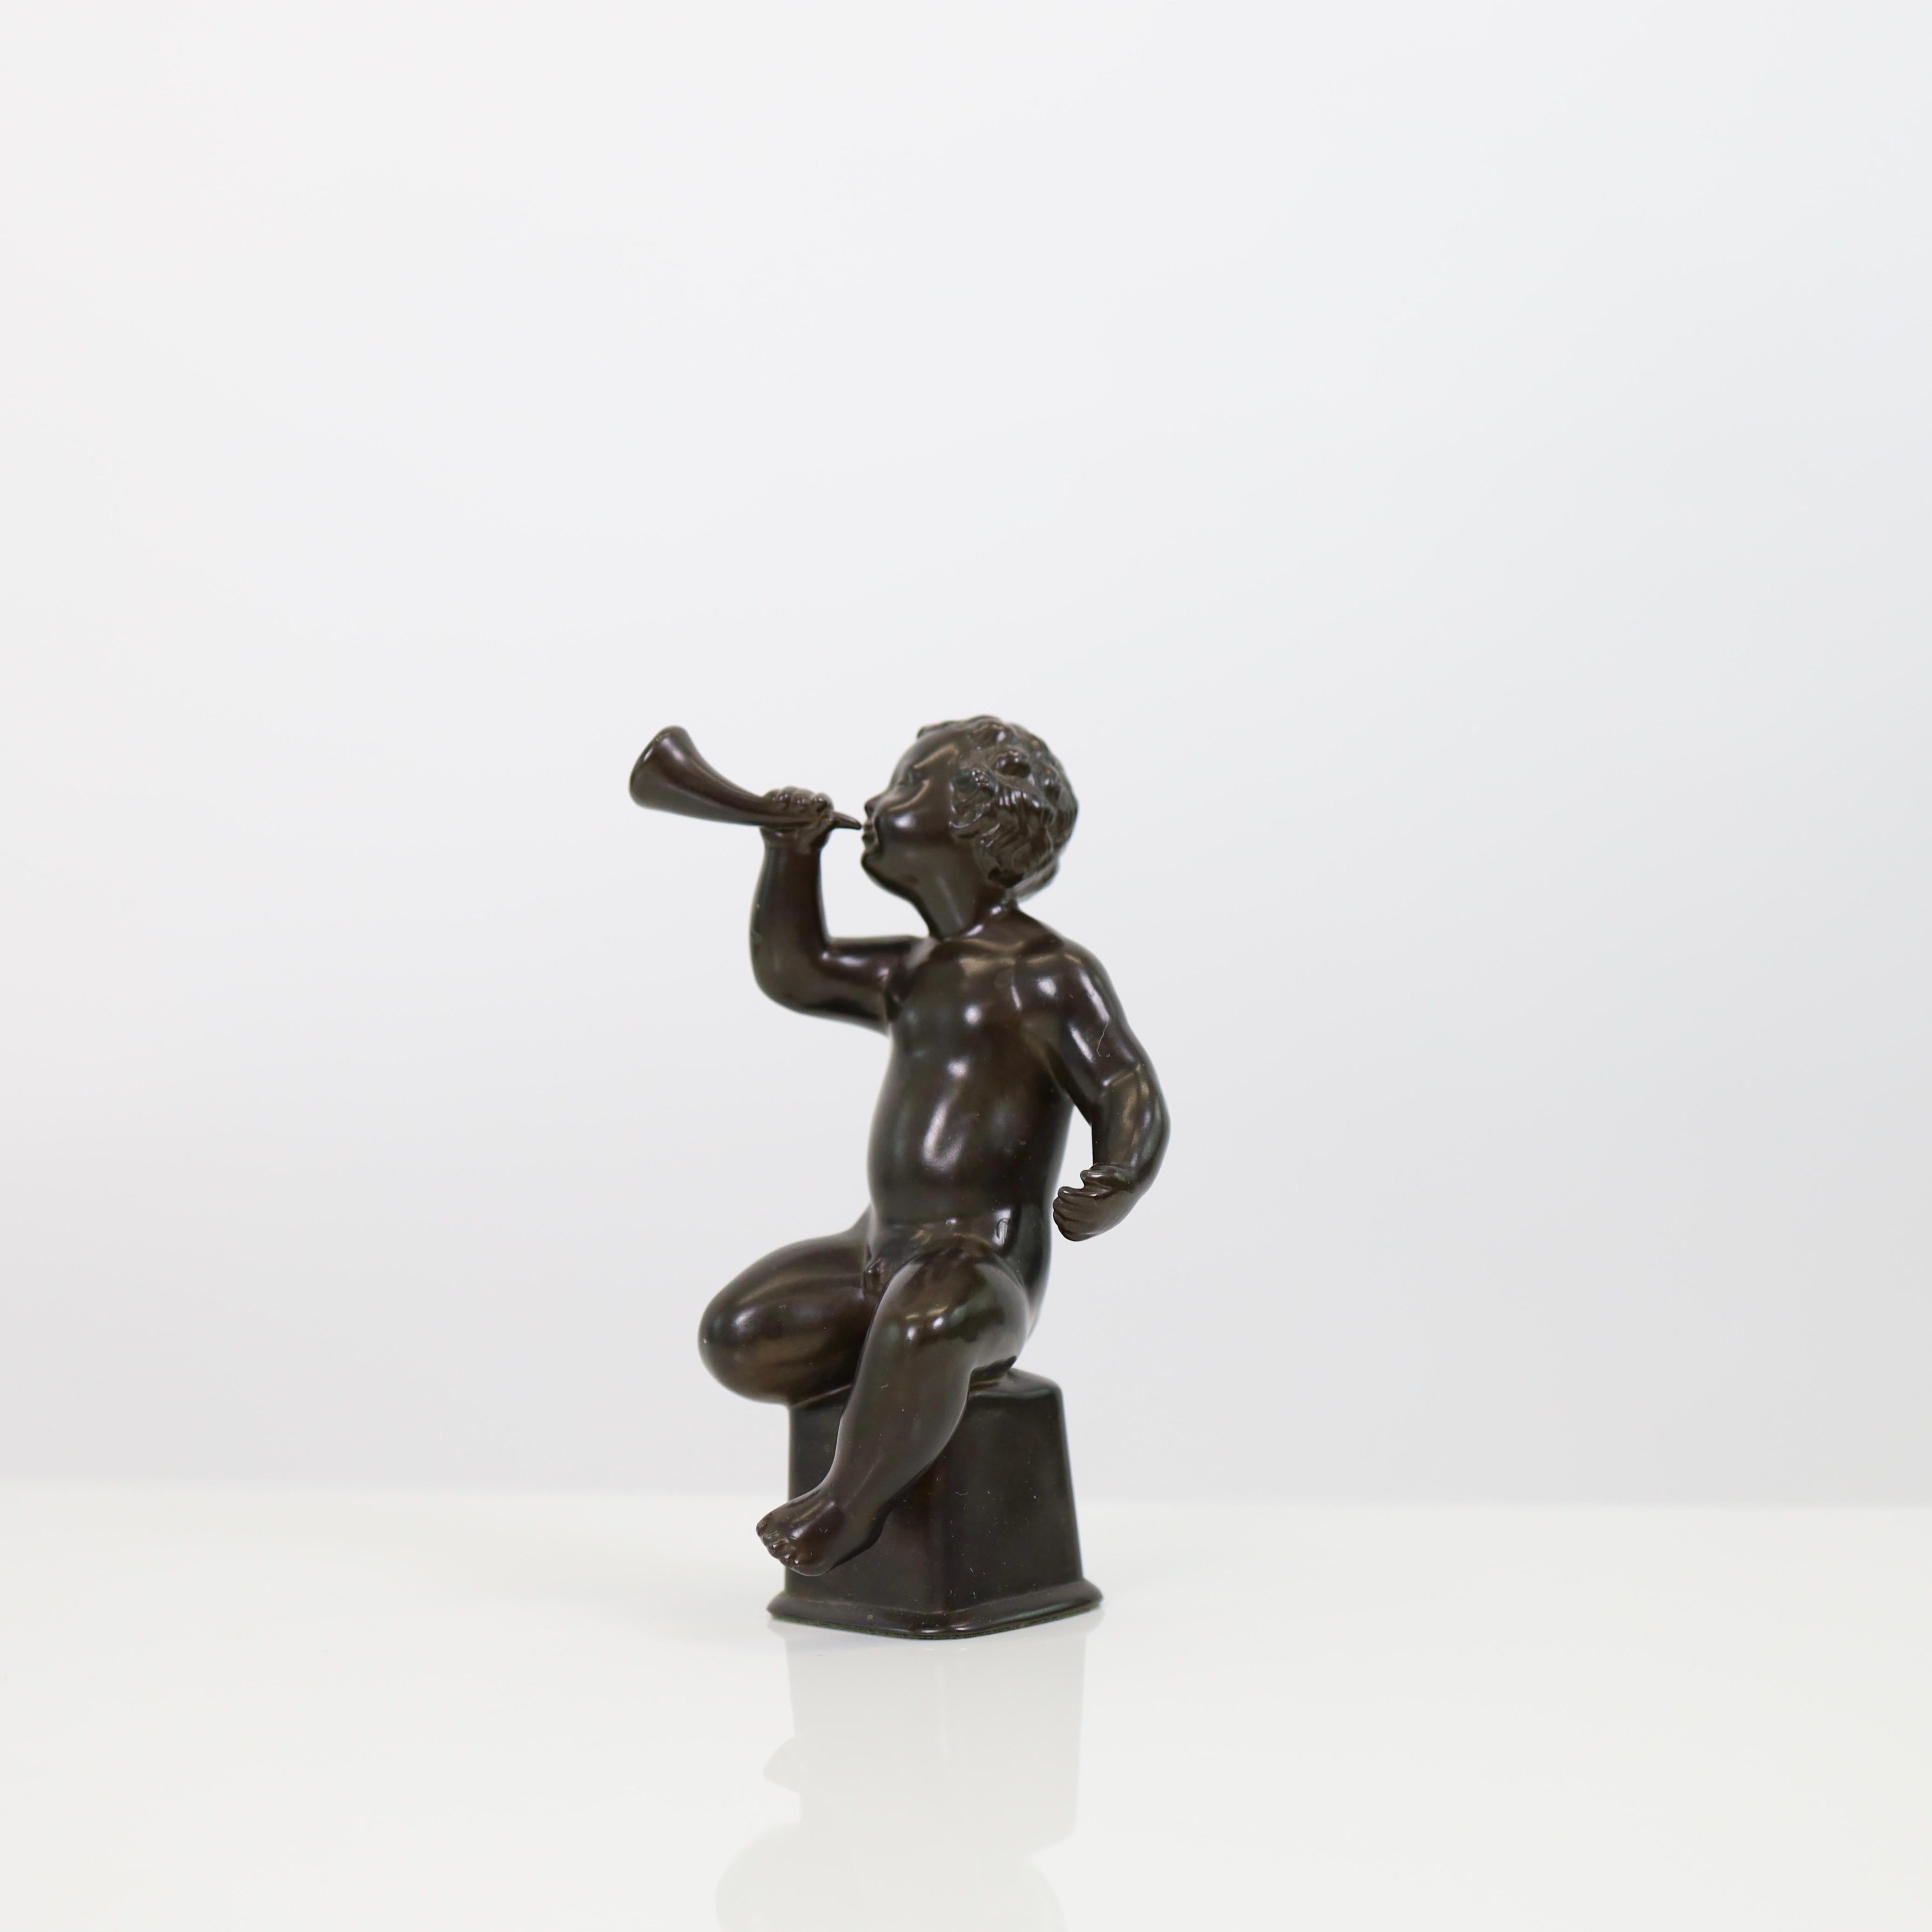 A little, exquisite 'Boy with horn' bust in excellent condition designed by Just Andersen in 1939.

* A small metal sculpture of a boy with a horn
* Designer: Just Andersen
* Model: D2170 (stamped 'Just D2170’)
* Condition: Excellent vintage